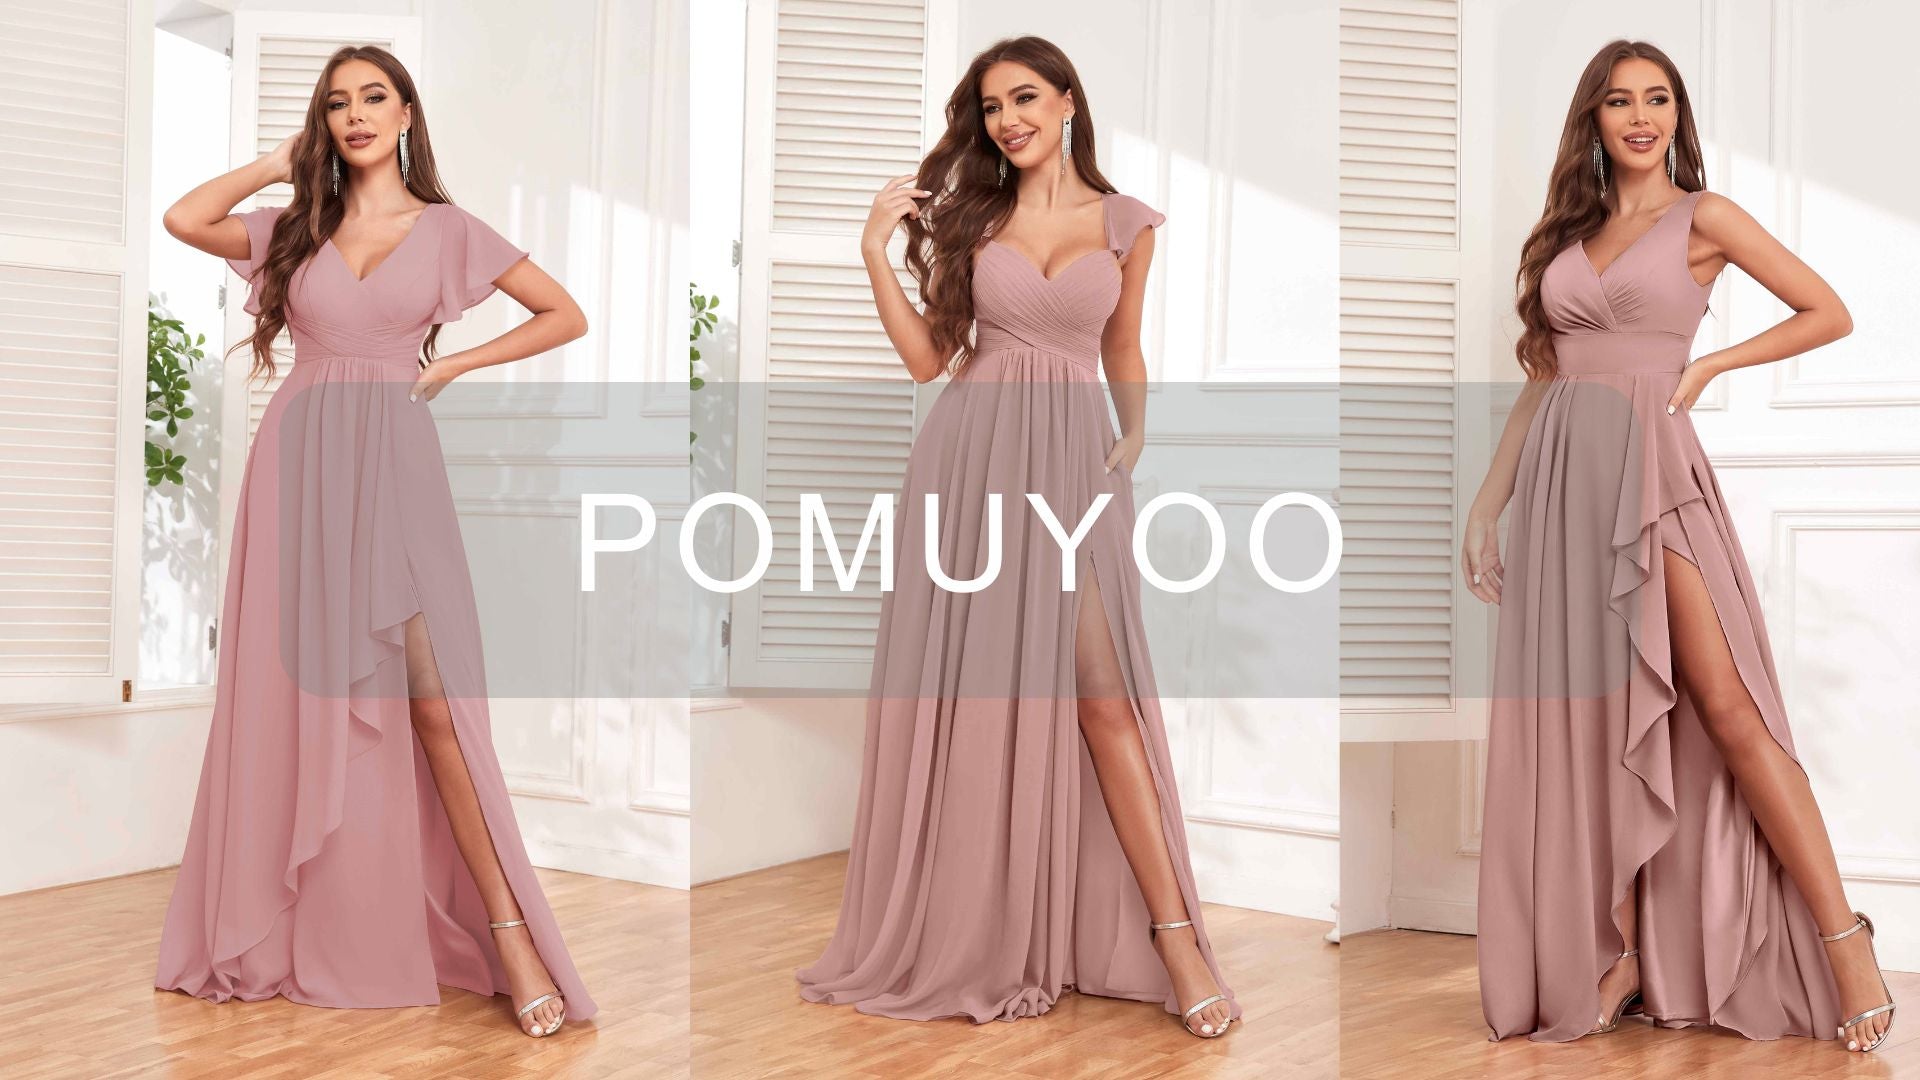 Why Choose Dusty Rose Bridesmaid Dresses?